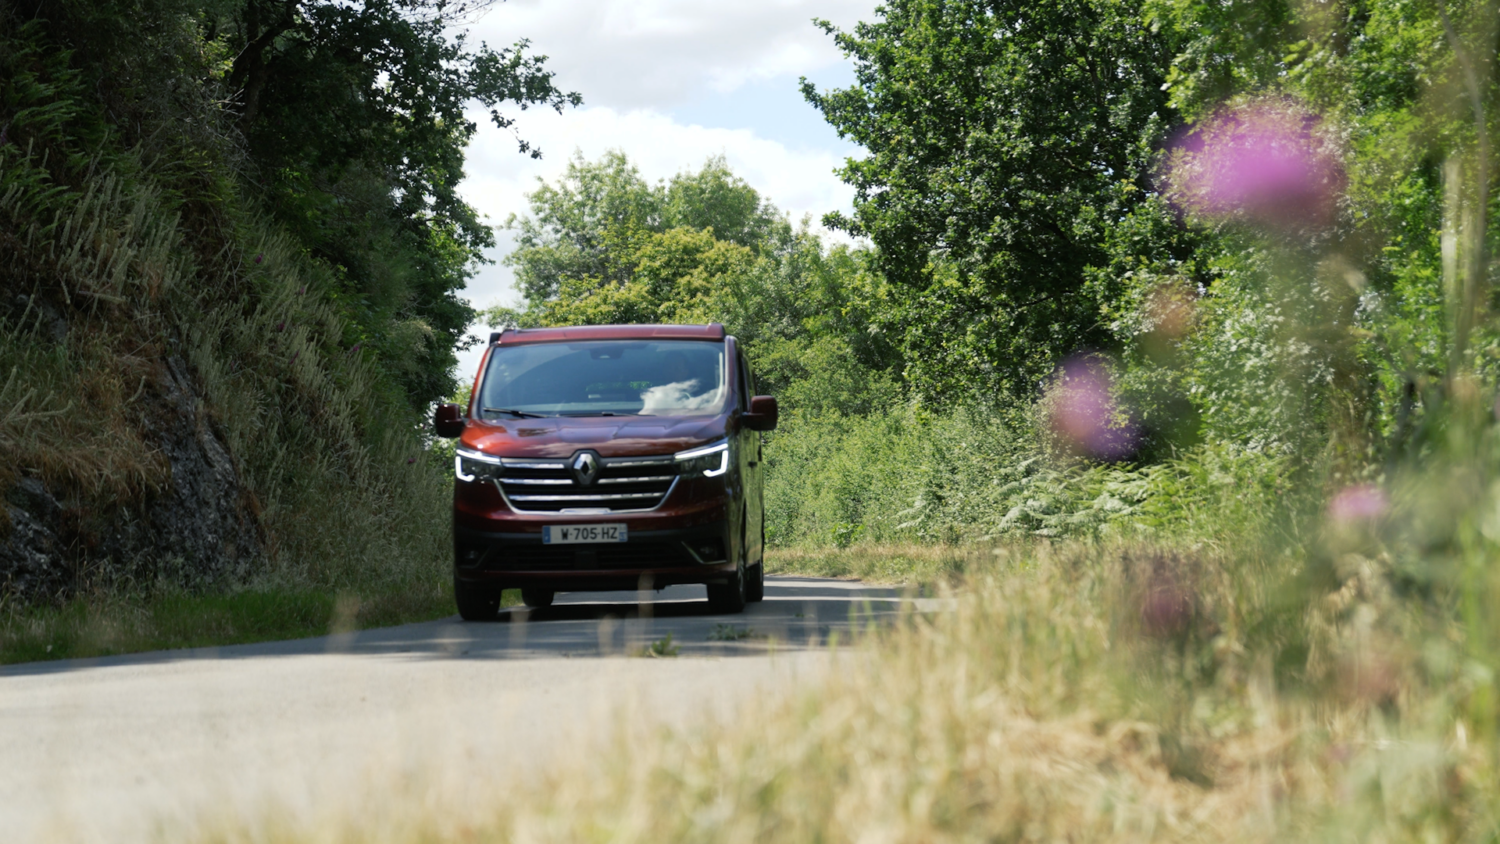 2022 - Story - All-new Renault Trafic SpaceNomad: your place in the sun